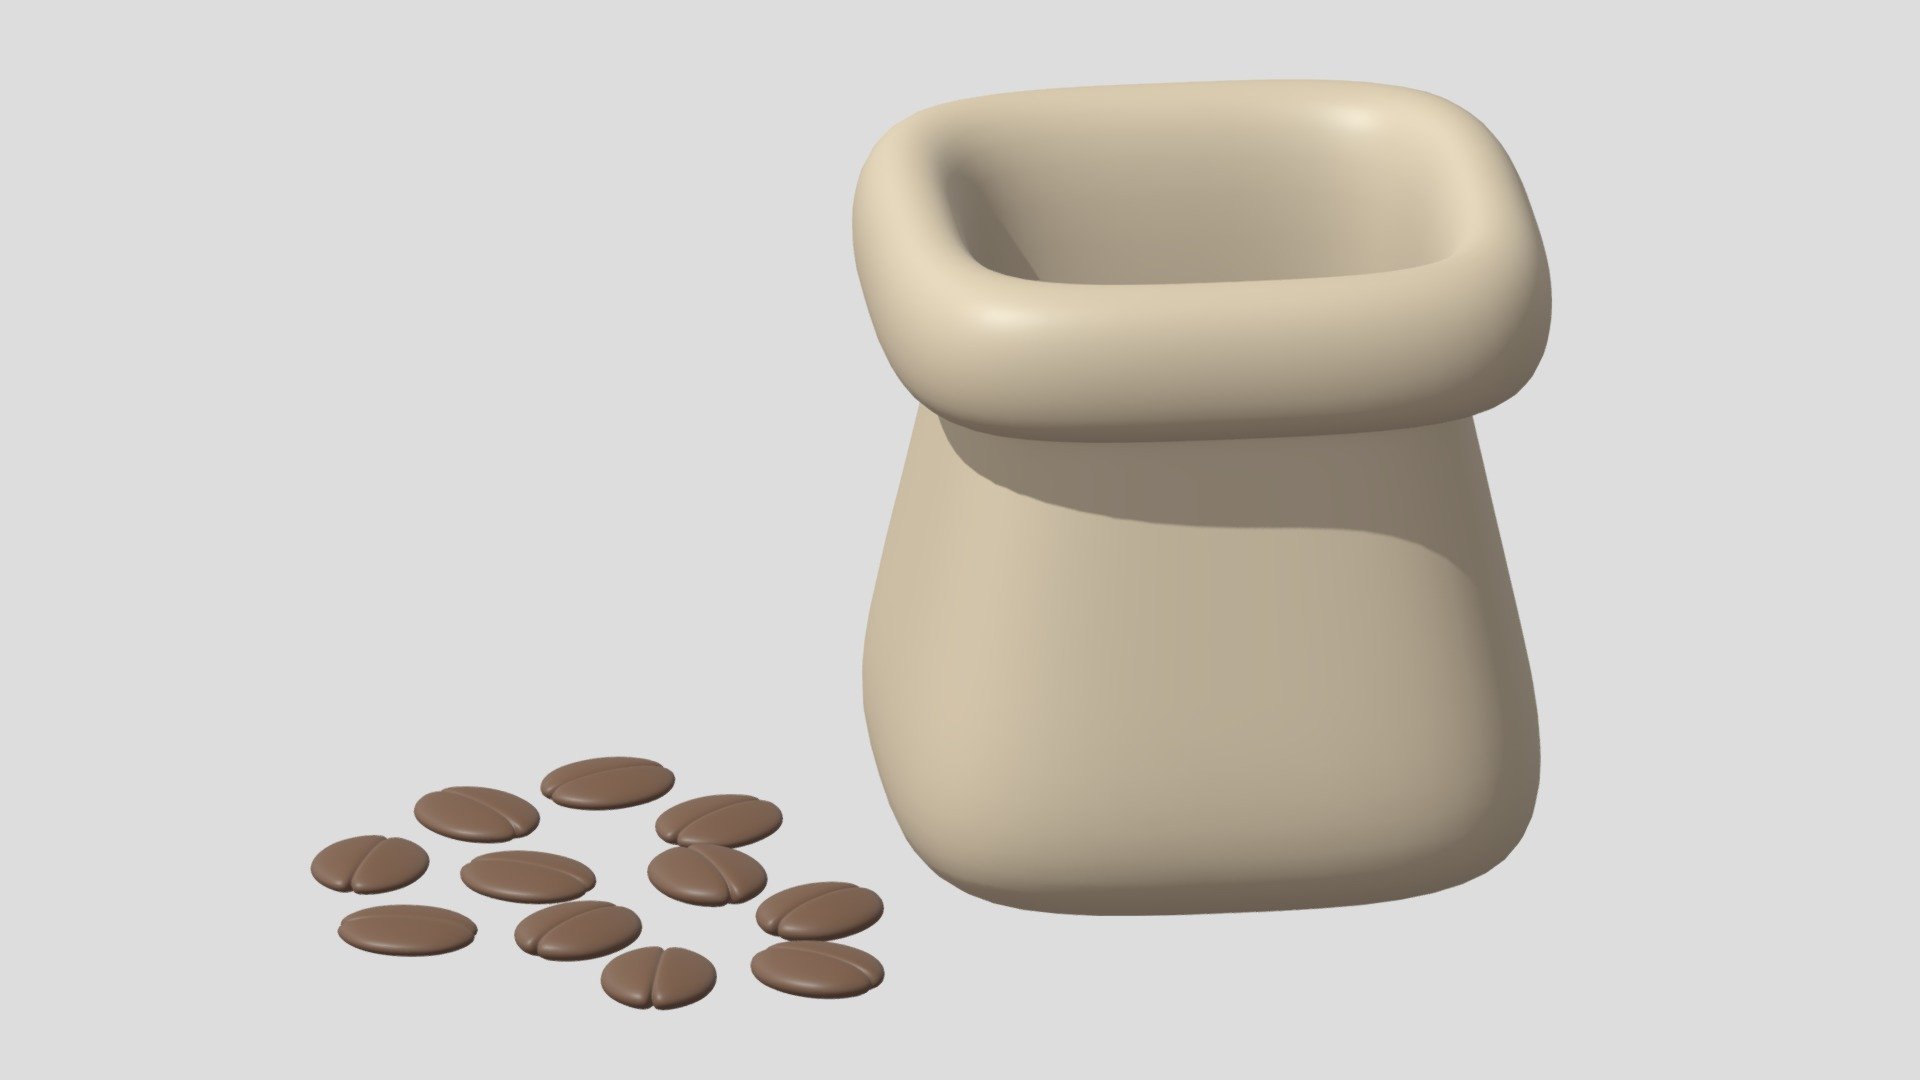 -Cartoon Coffee Bean and Coffee Sack.

-This product contains 12 objects.

-Total vert: 19,608 poly: 19,584.

-Materials and object have the correct names.

-This product was created in Blender 3.0.

-Formats: blend, fbx, obj, c4d, dae, abc, glb, stl, unity.

-We hope you enjoy this model.

-Thank you 3d model